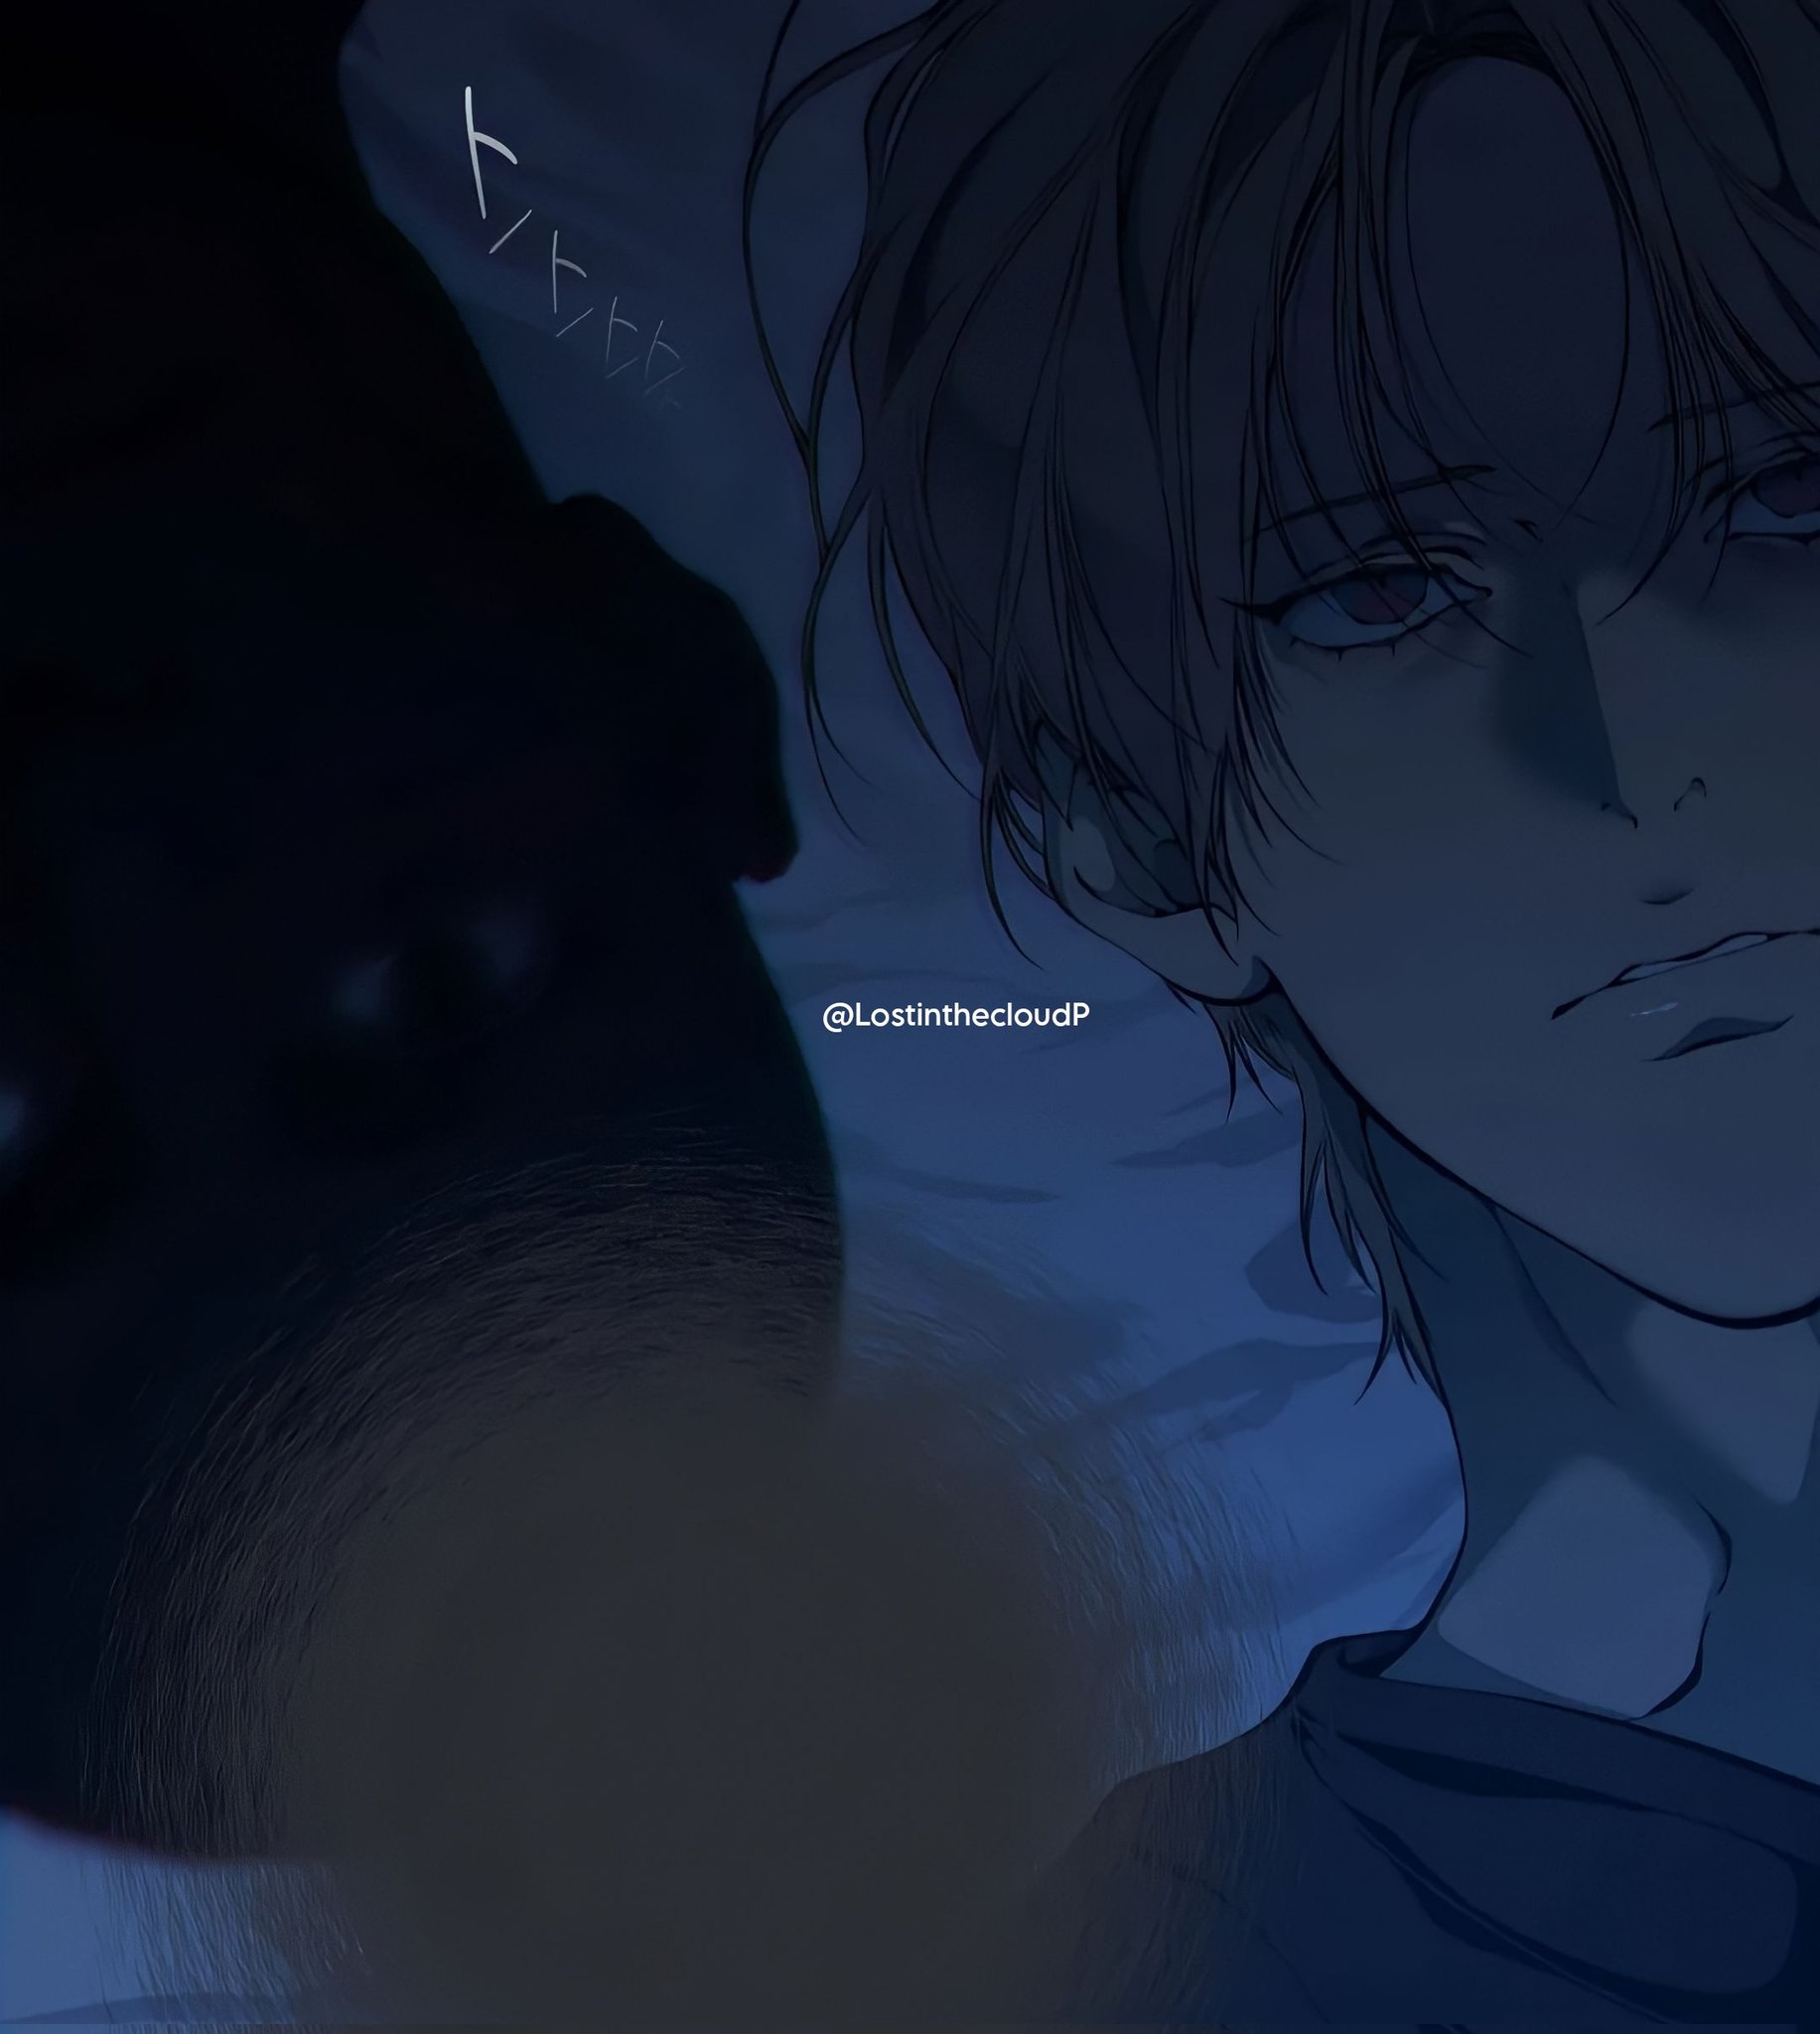 Lost In The Cloud Manga Lost In The Cloud on X: "#Lostinthecloud #클라우드 “There's a darkness  surrounding me” In EP72, while Cirrus was sleep paralysed in his deep dark  thoughts there's an intrusive voice telling him in